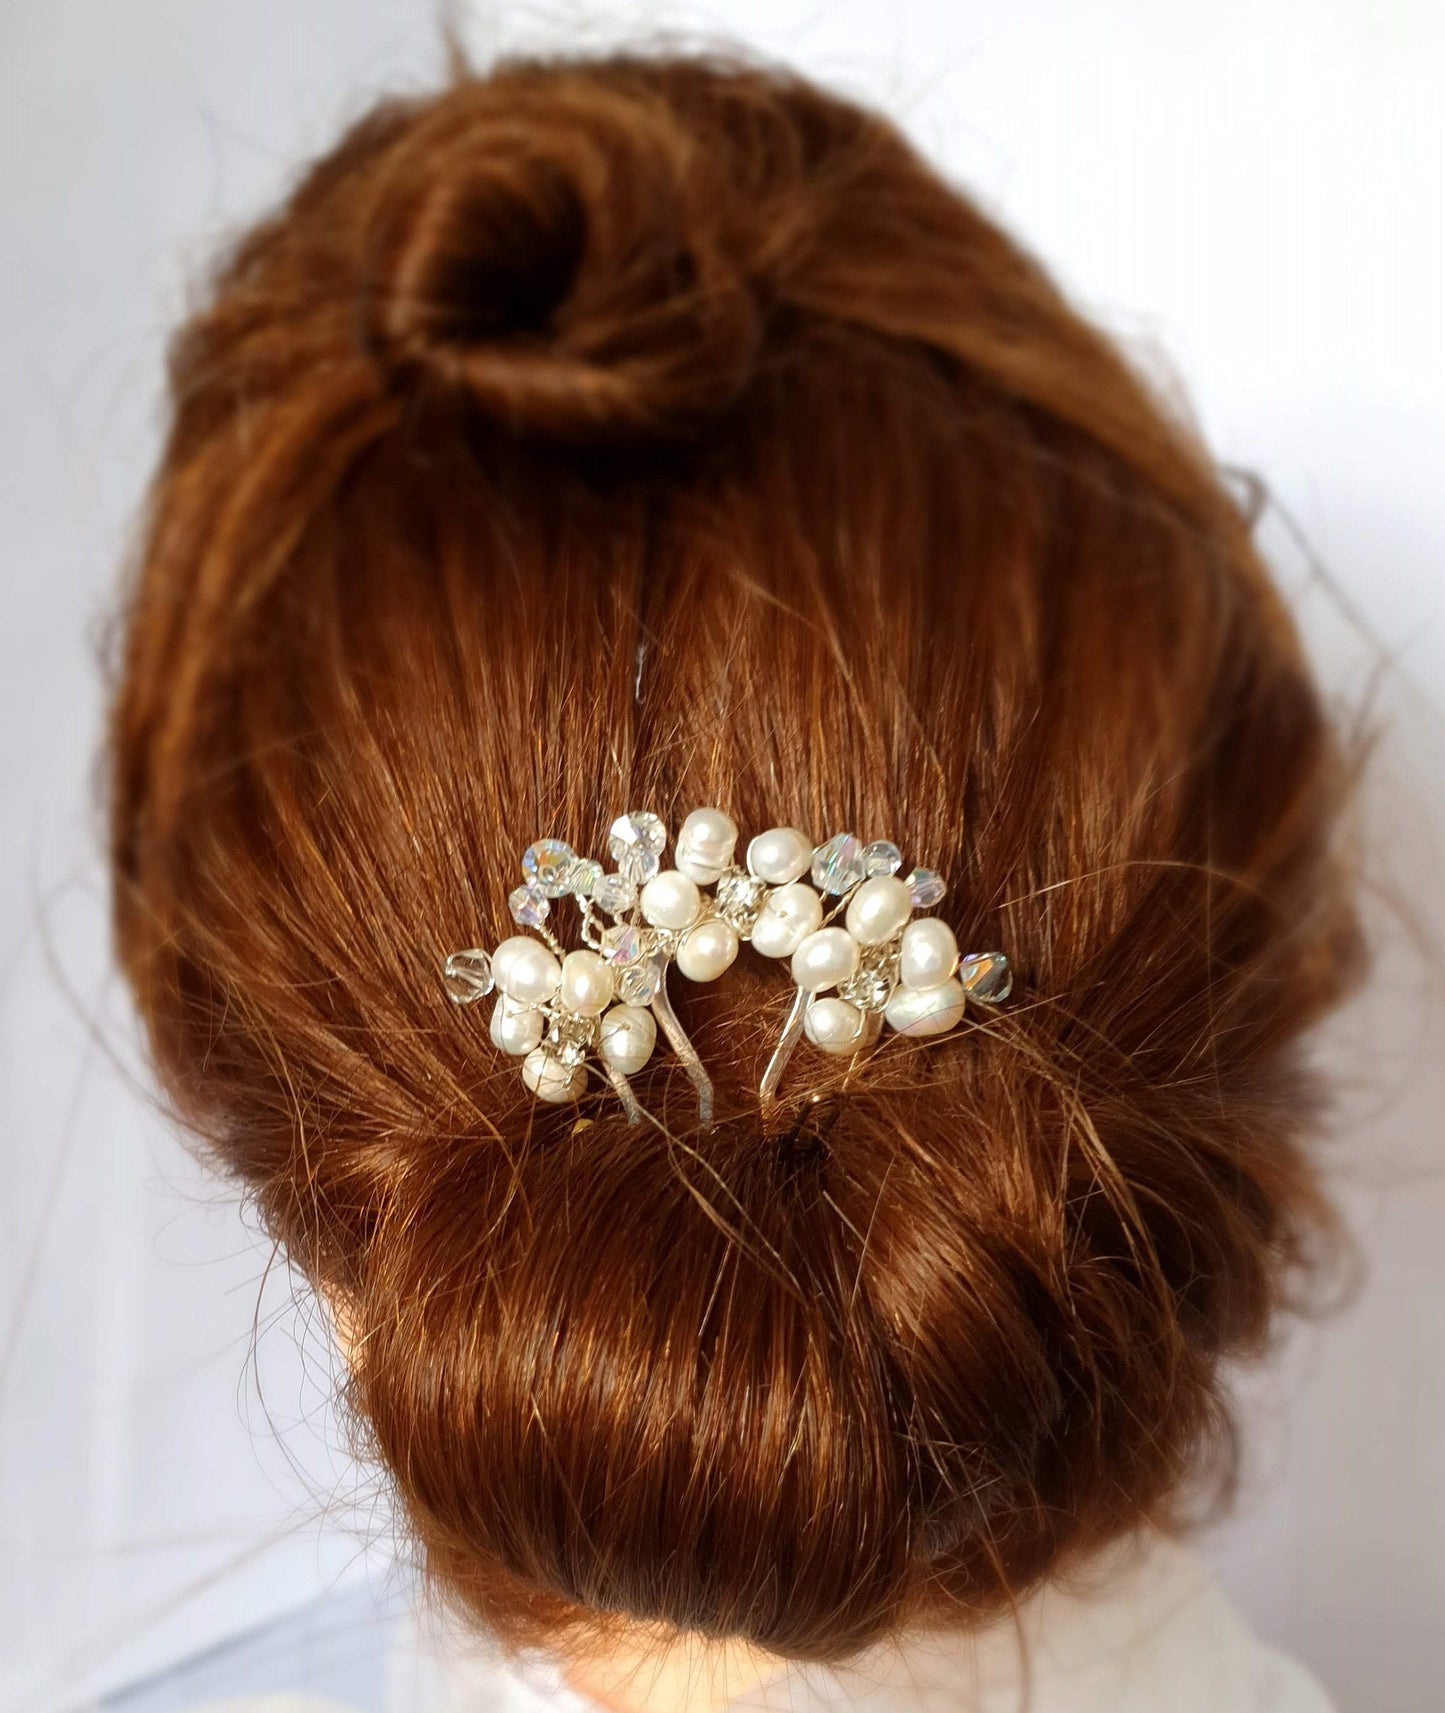 Handmade bridal hair comb with white freshwater pearls, Elegant and unique for special occasions, hair accessories